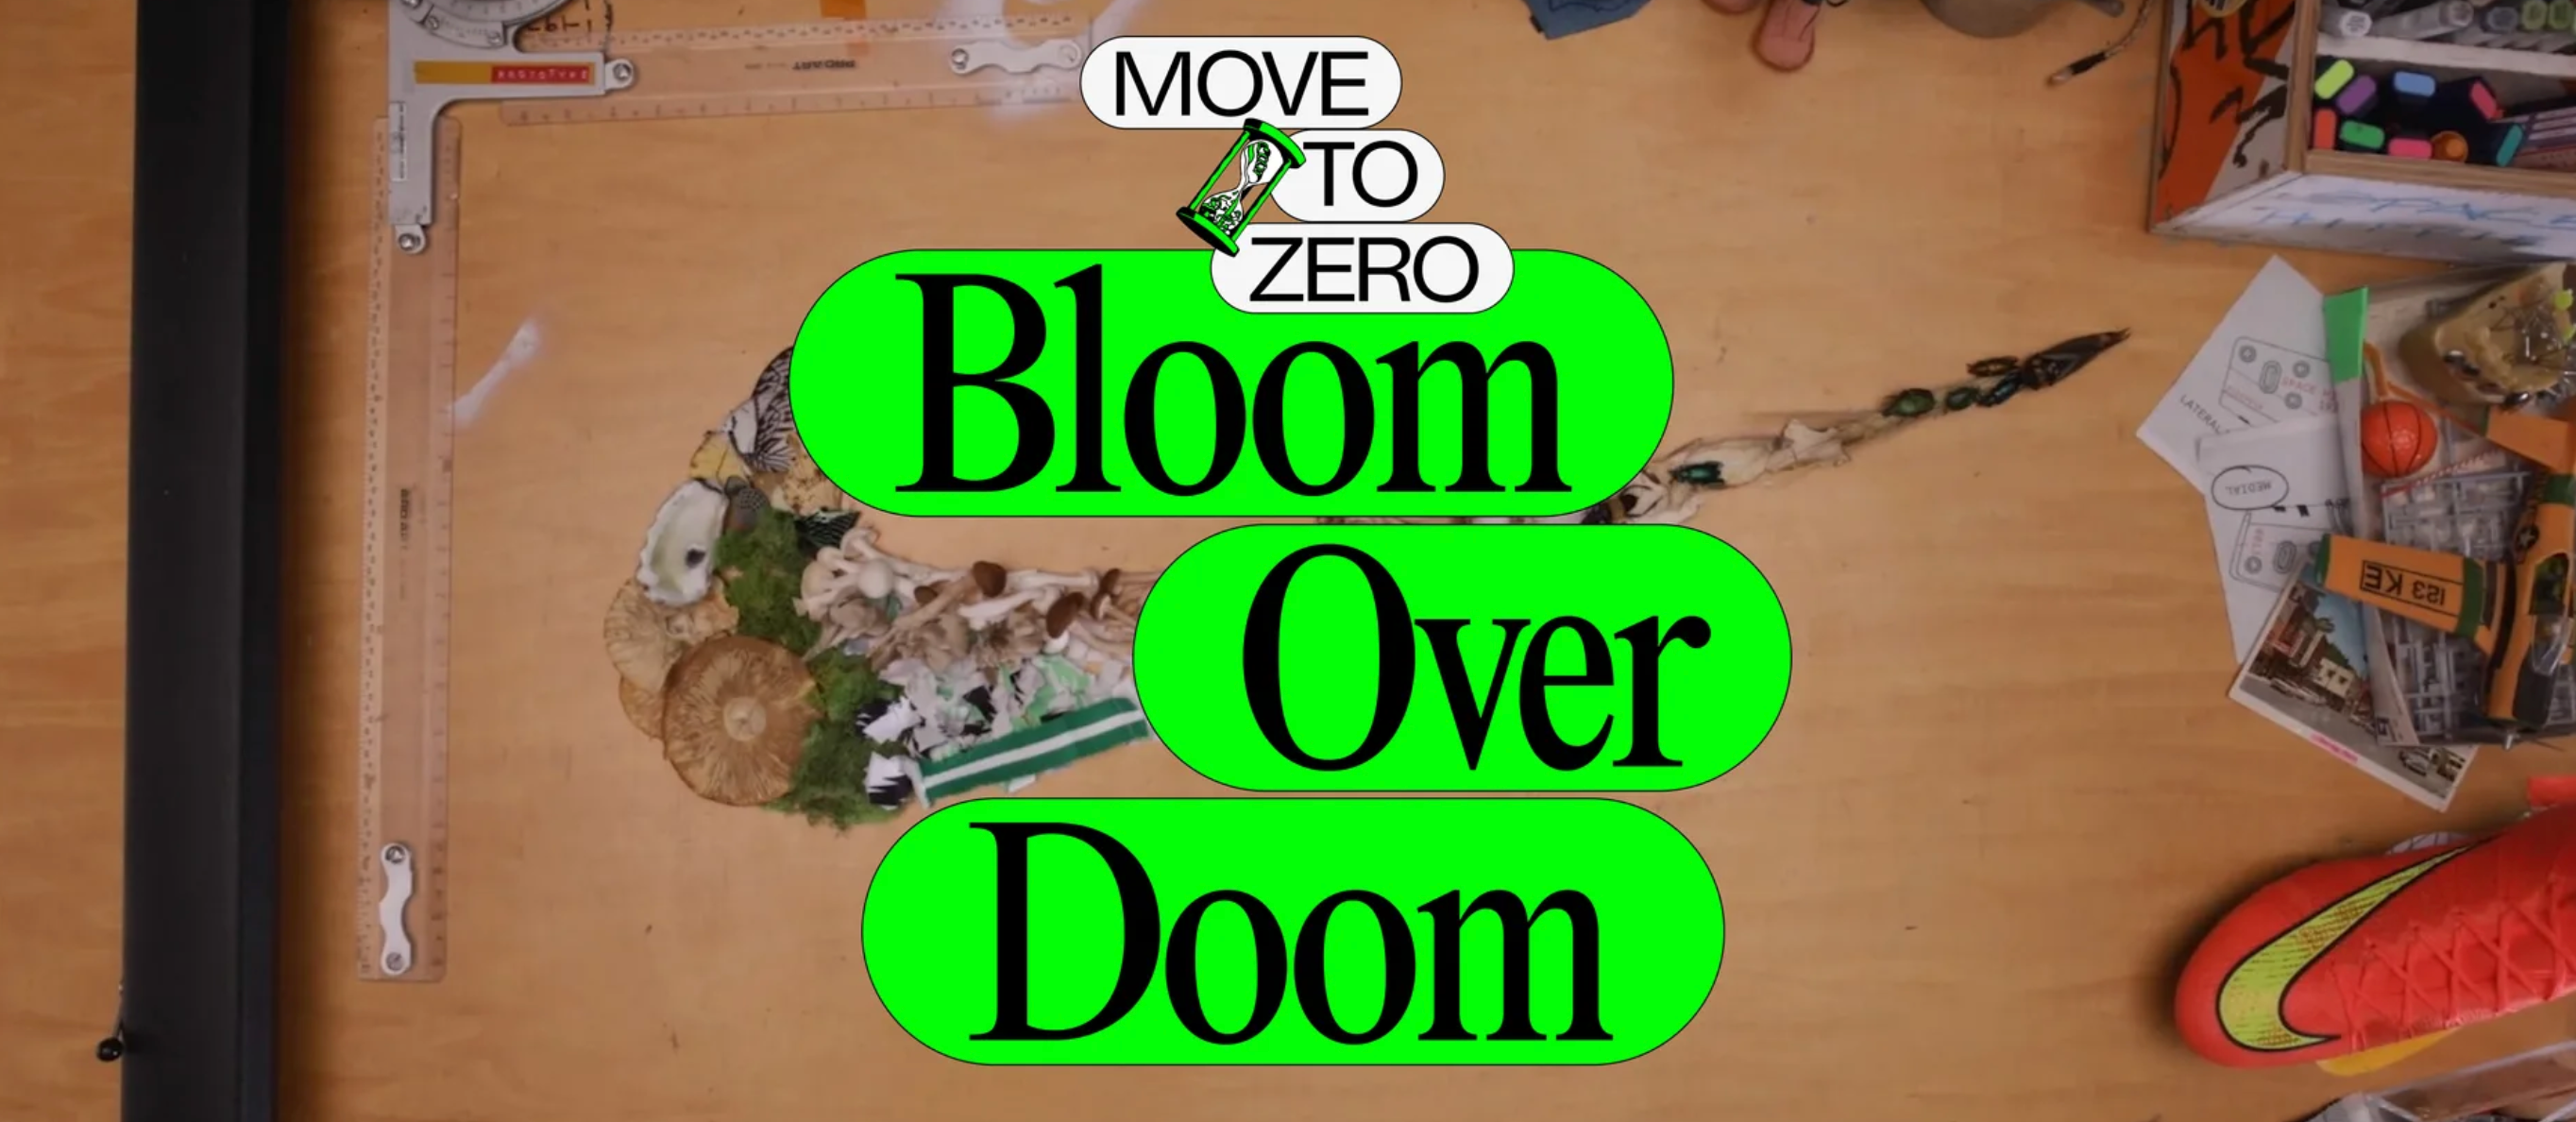 Nike practices green marketing by creating a product line with sustainable materials, and creating a sustainability campaign called Move to sero Bloom Over Doom